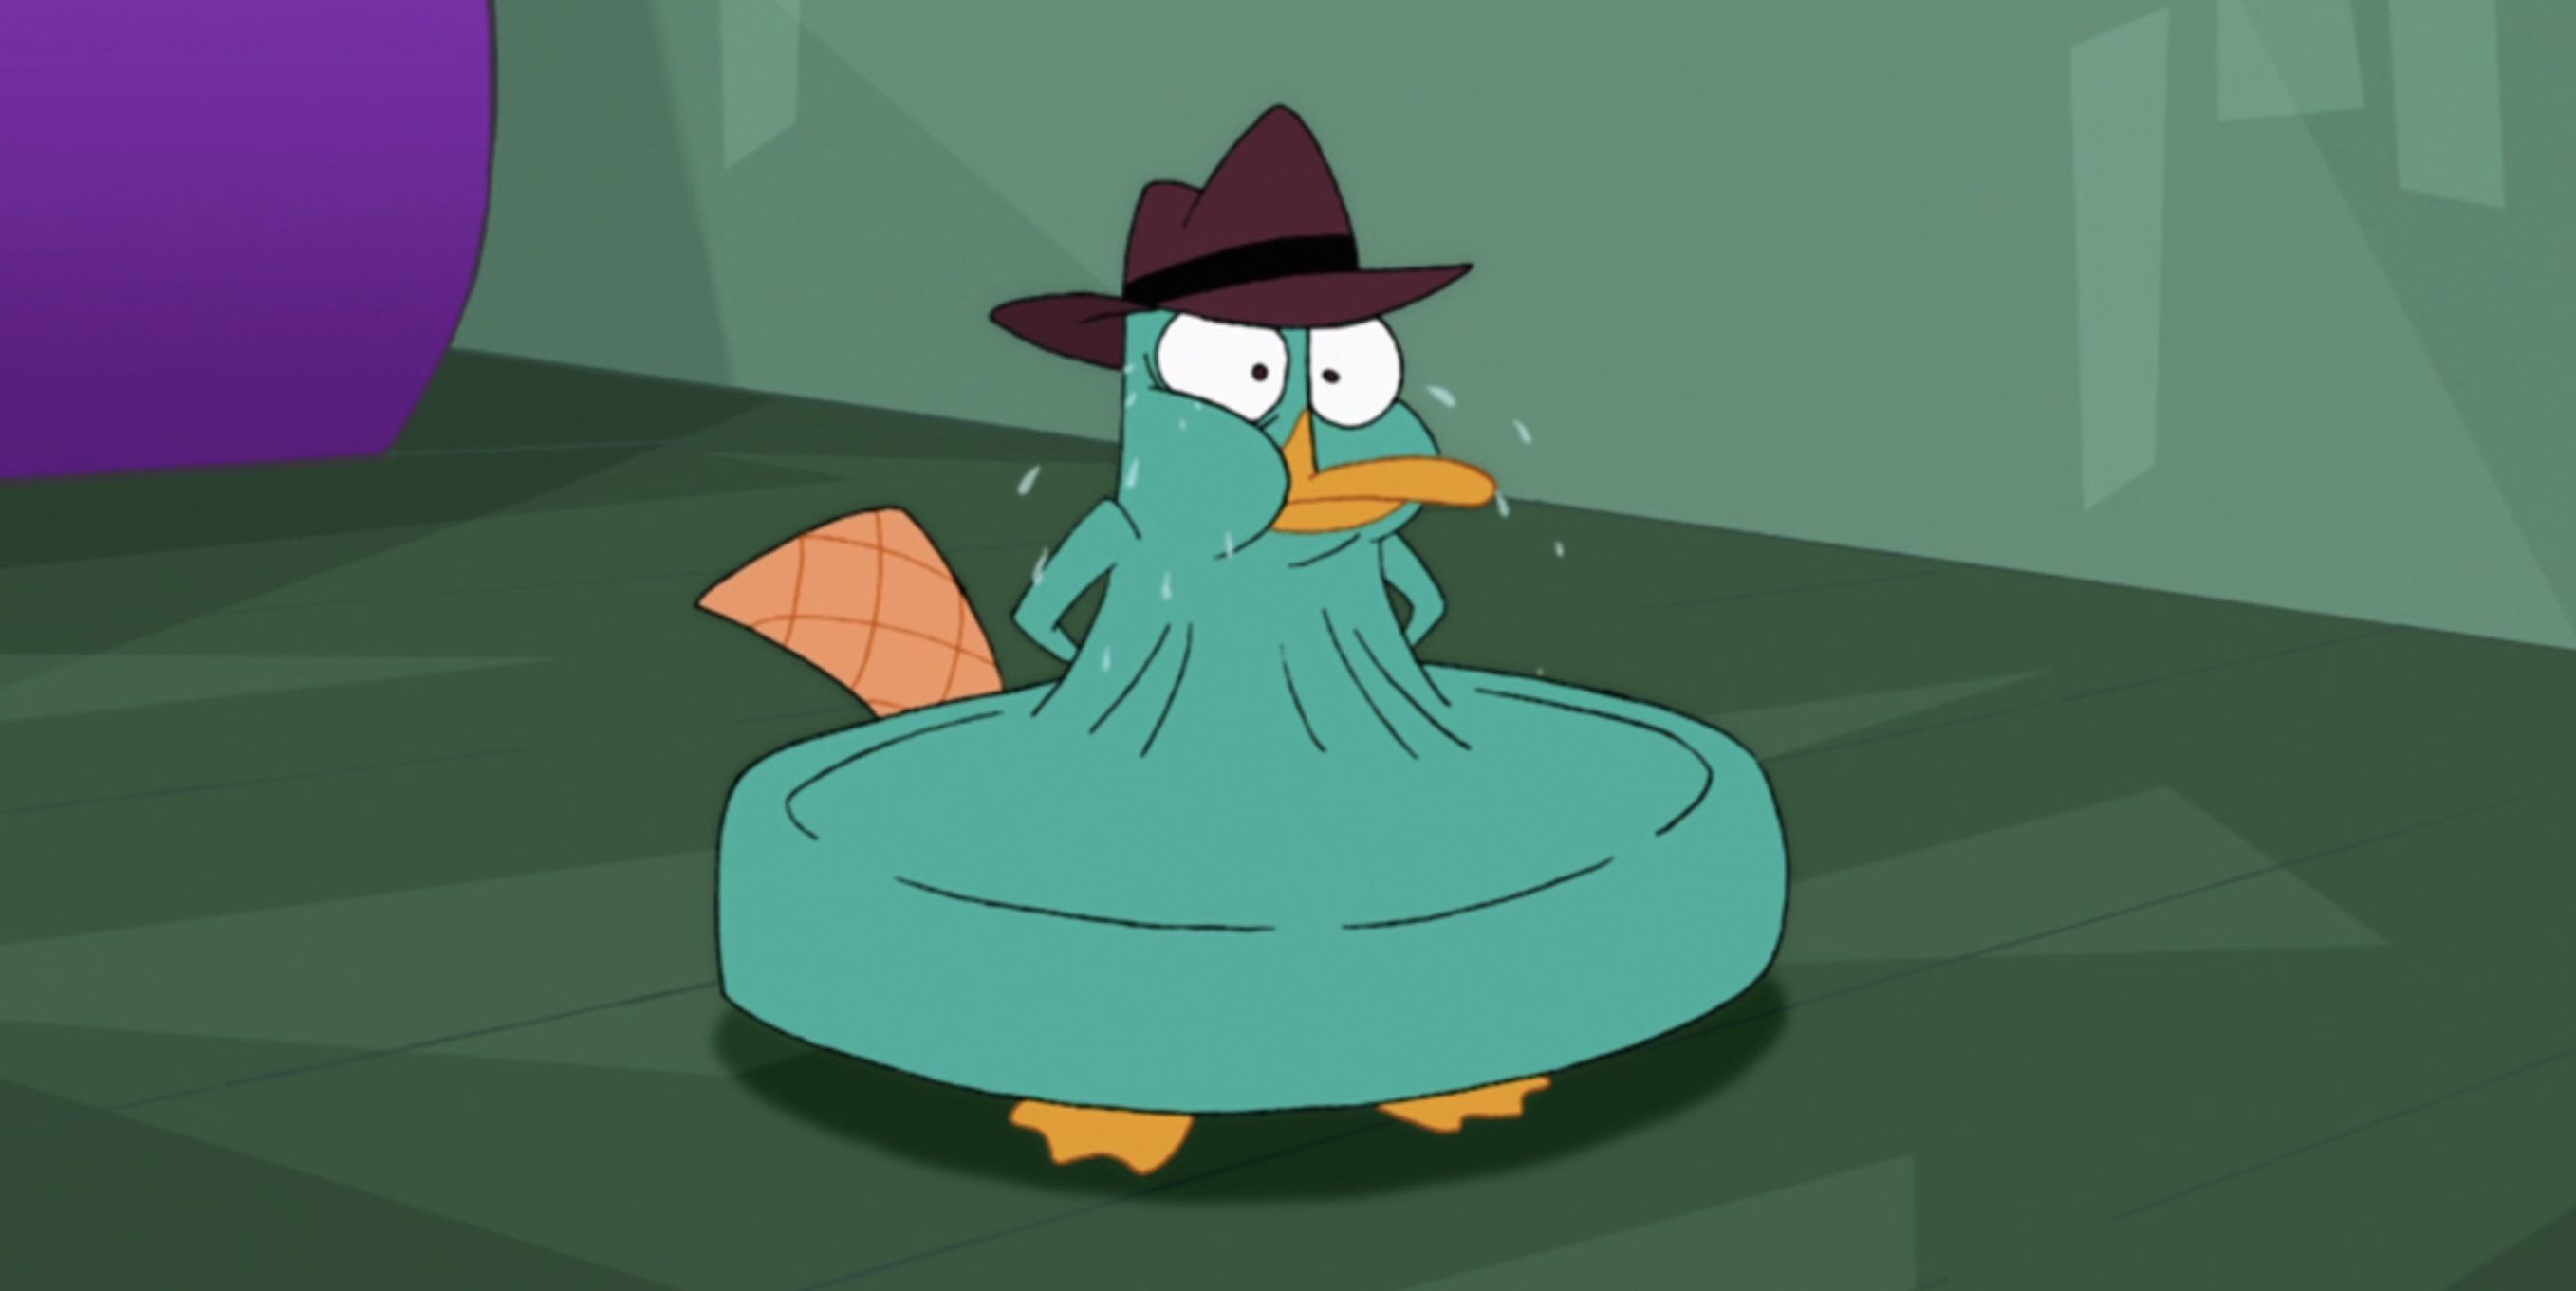 Perry Eats The Cheese